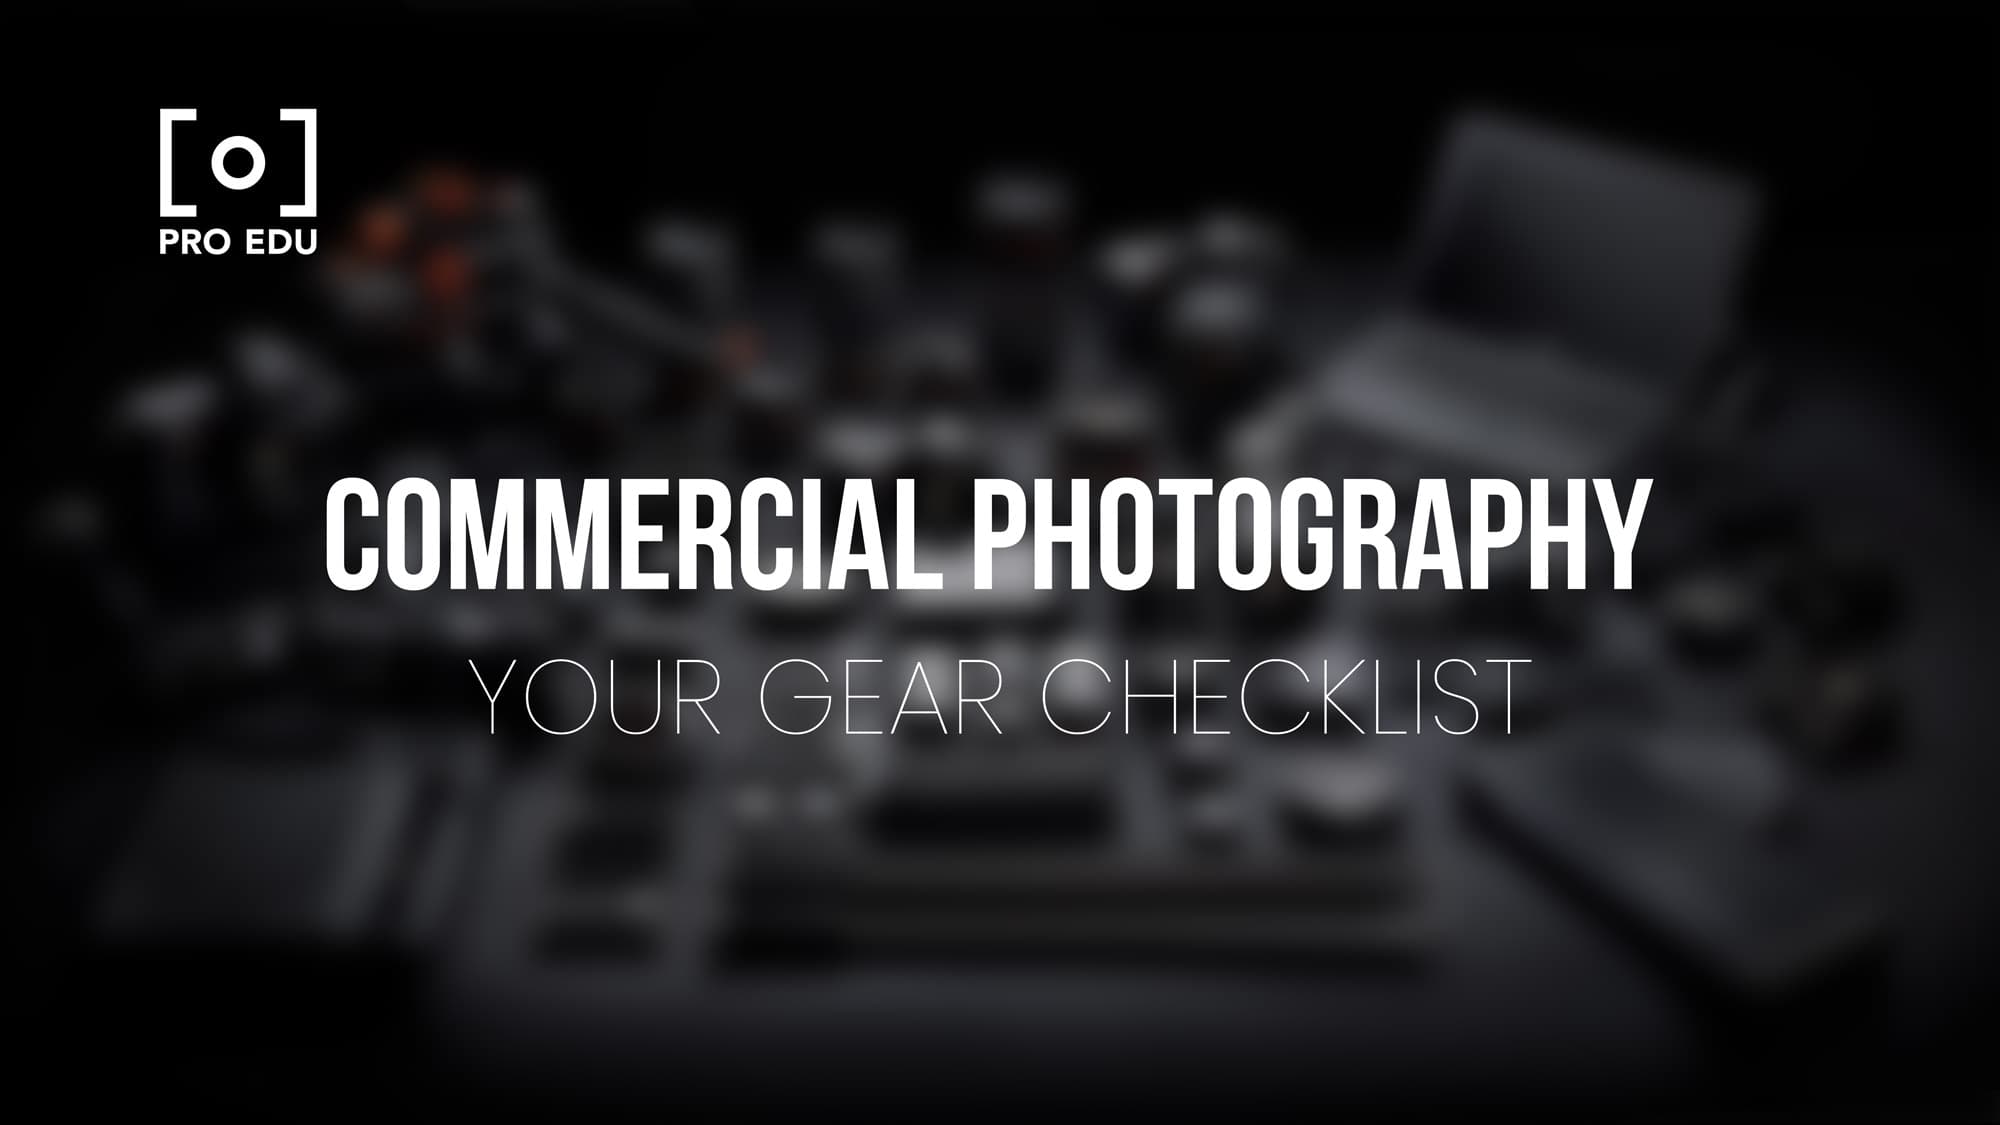 Commercial photography gear needed for photographers pro edu